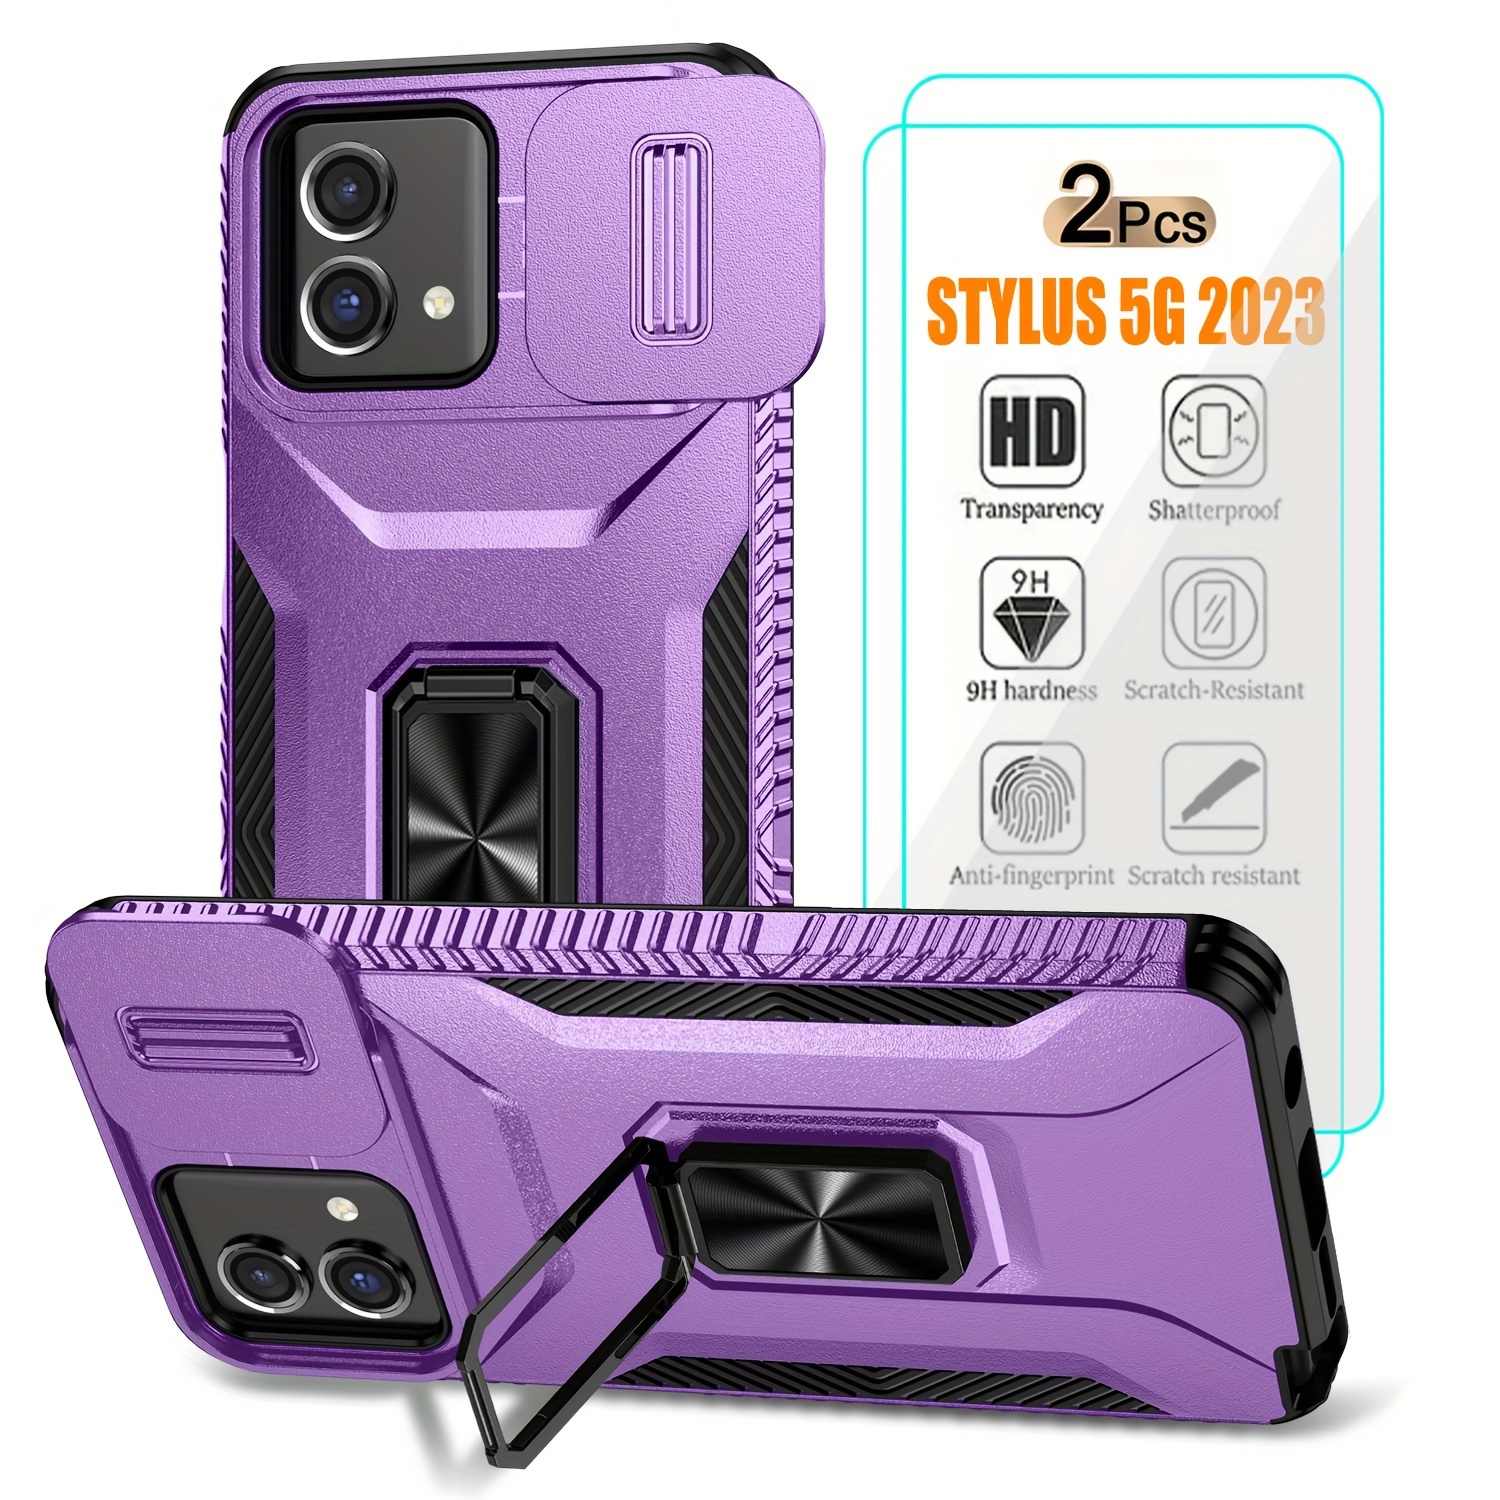 Coque Game Boy en silicone souple iPod Touch 5g - Mobile-Store